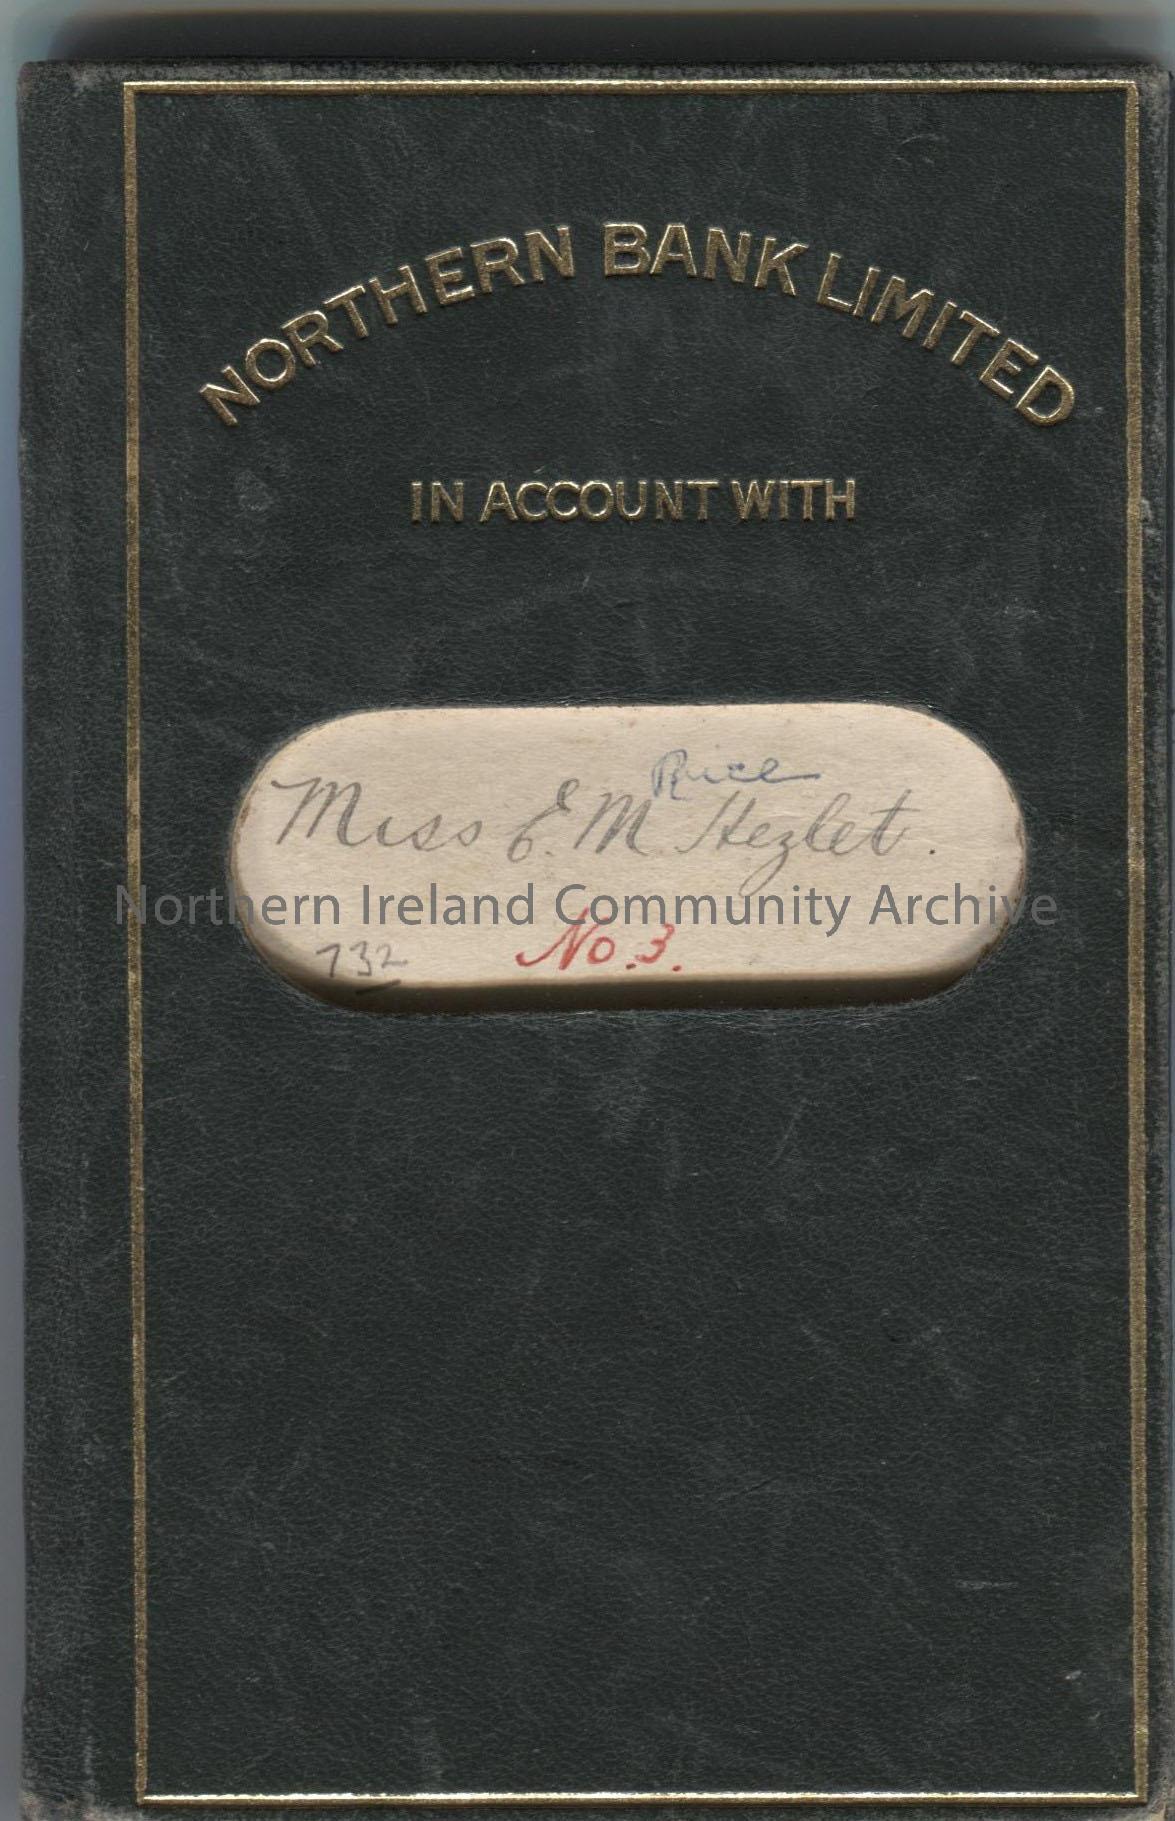 Miss E M Hezlet Northern Bank Limited Account Book – 1930s – 1950s.